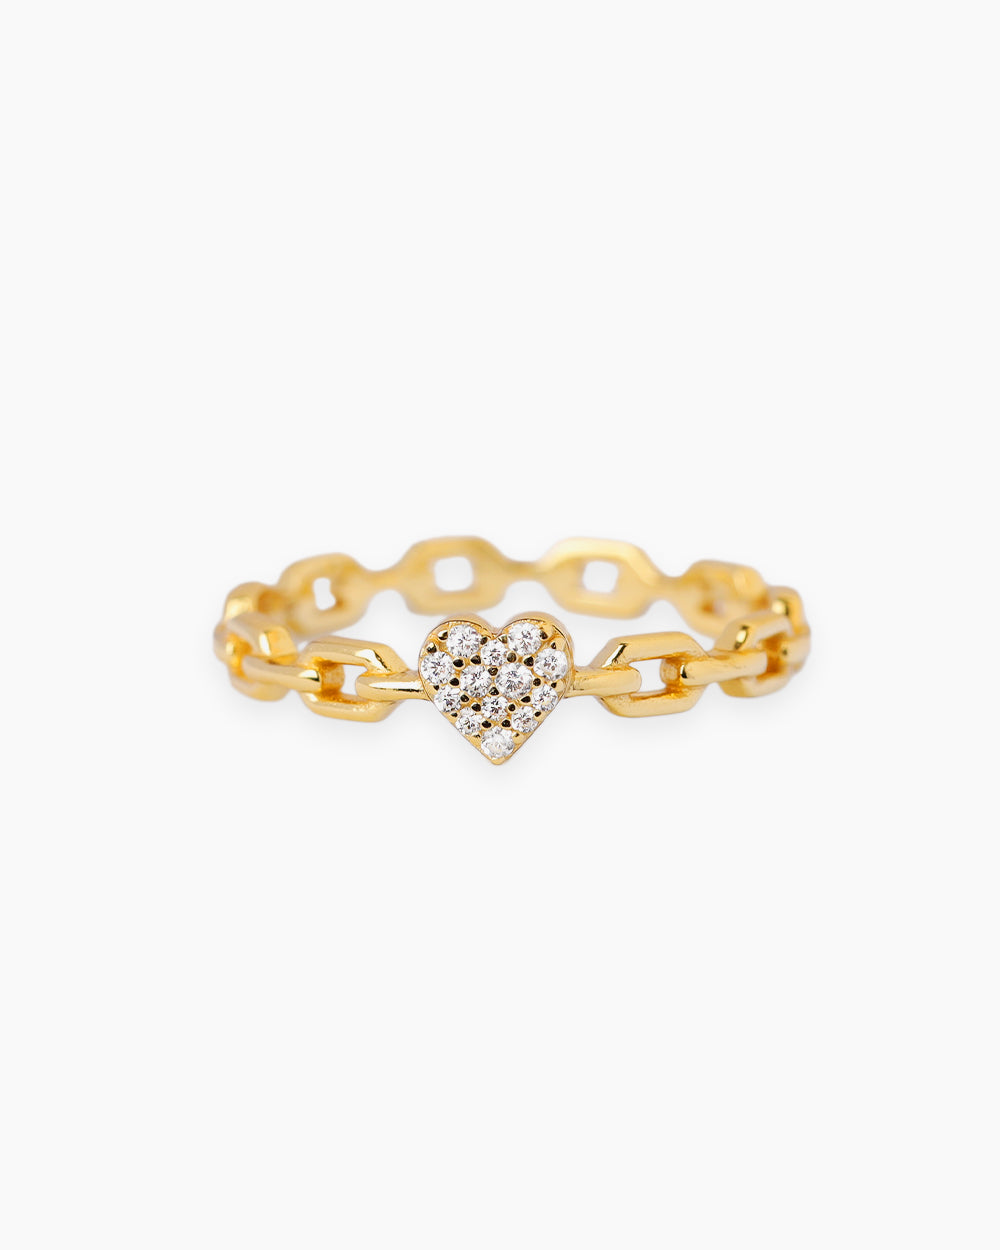 Claire Gold Ring